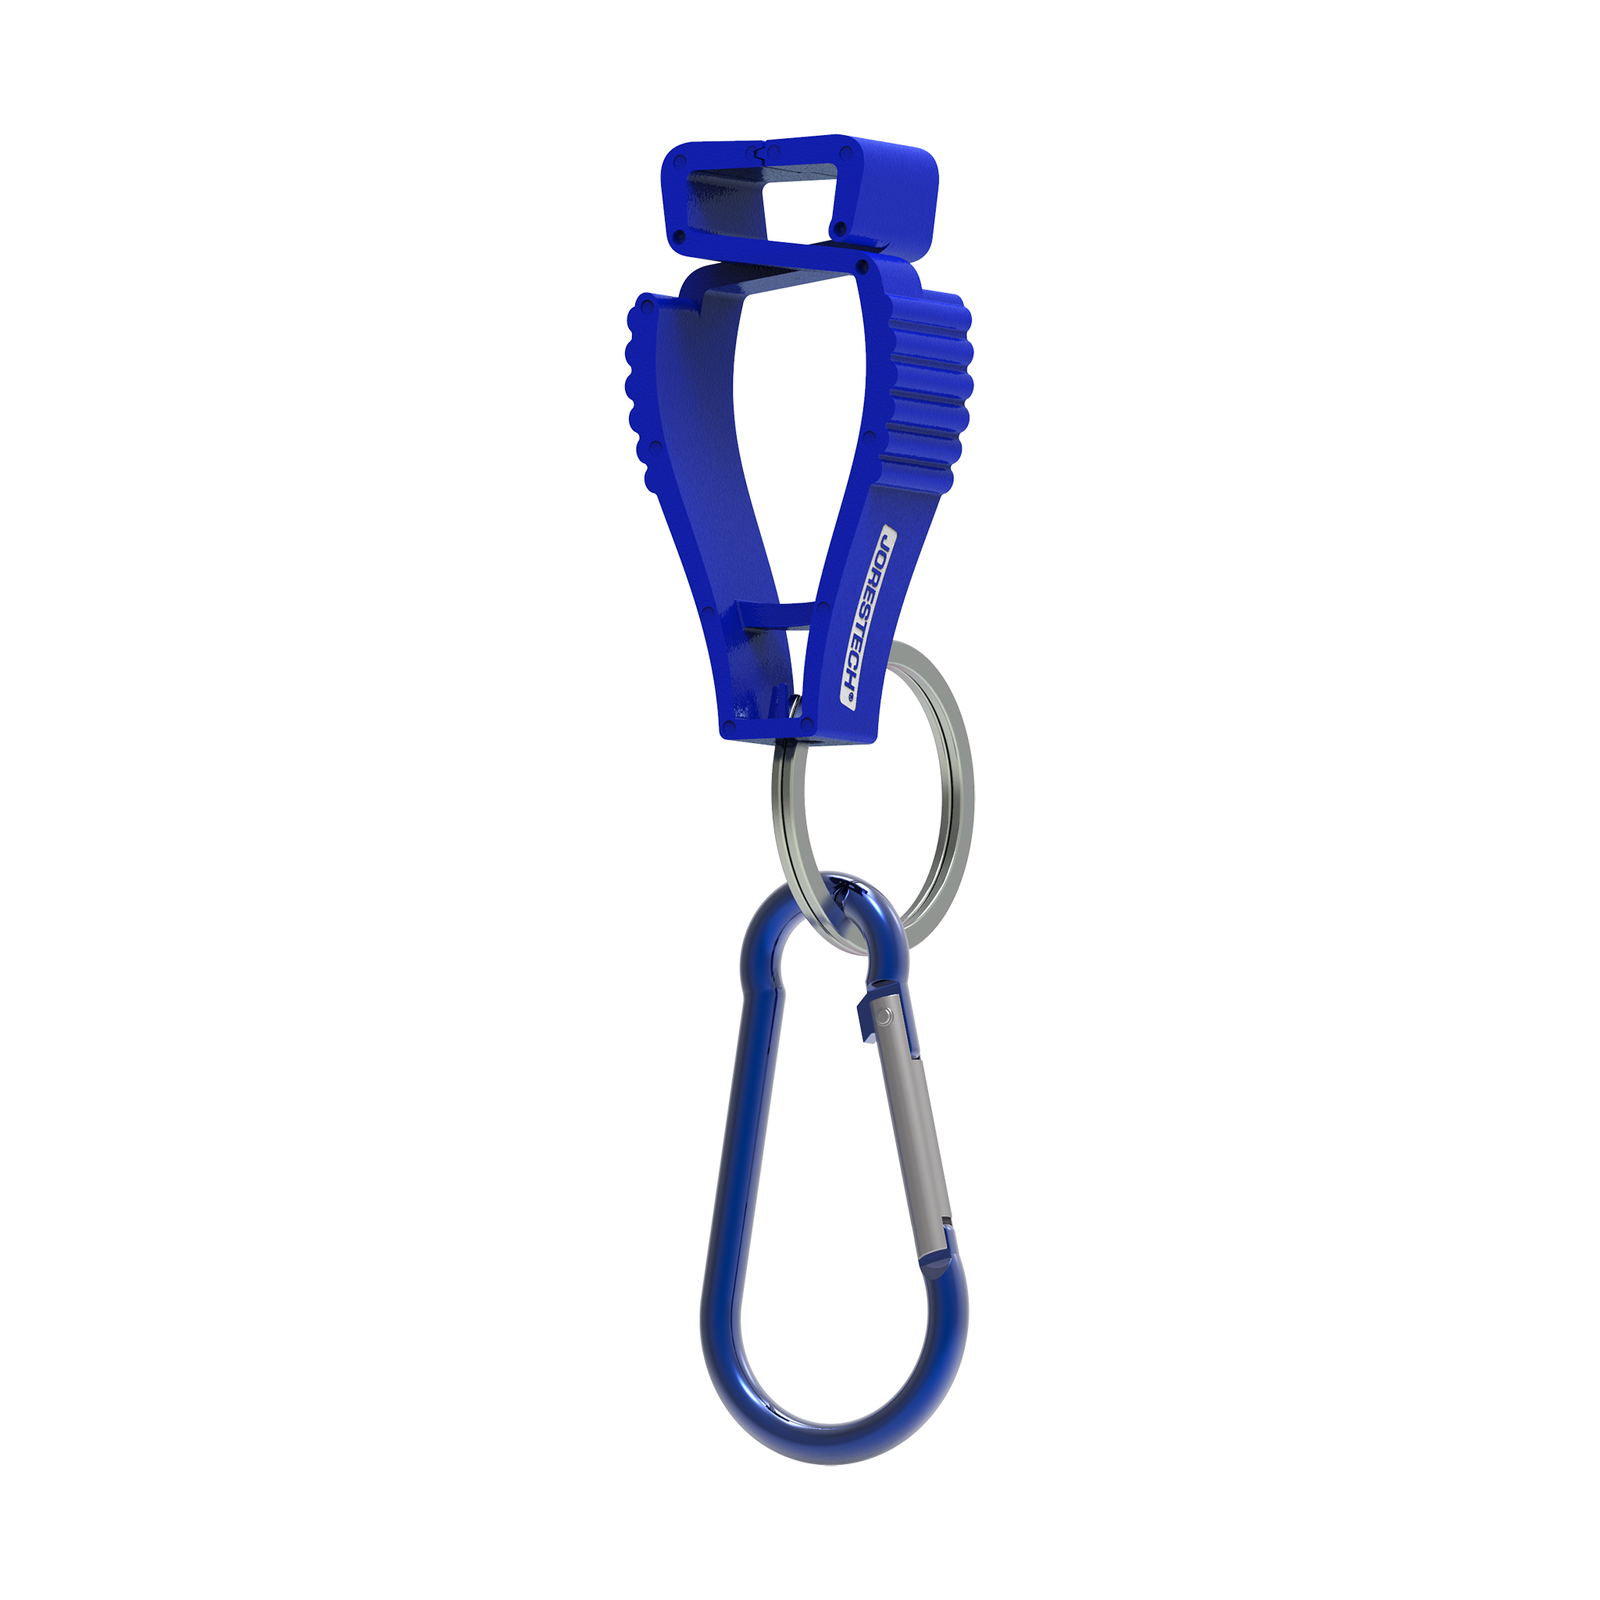 Blue JORESTECH glove clip safety holders with carabiner